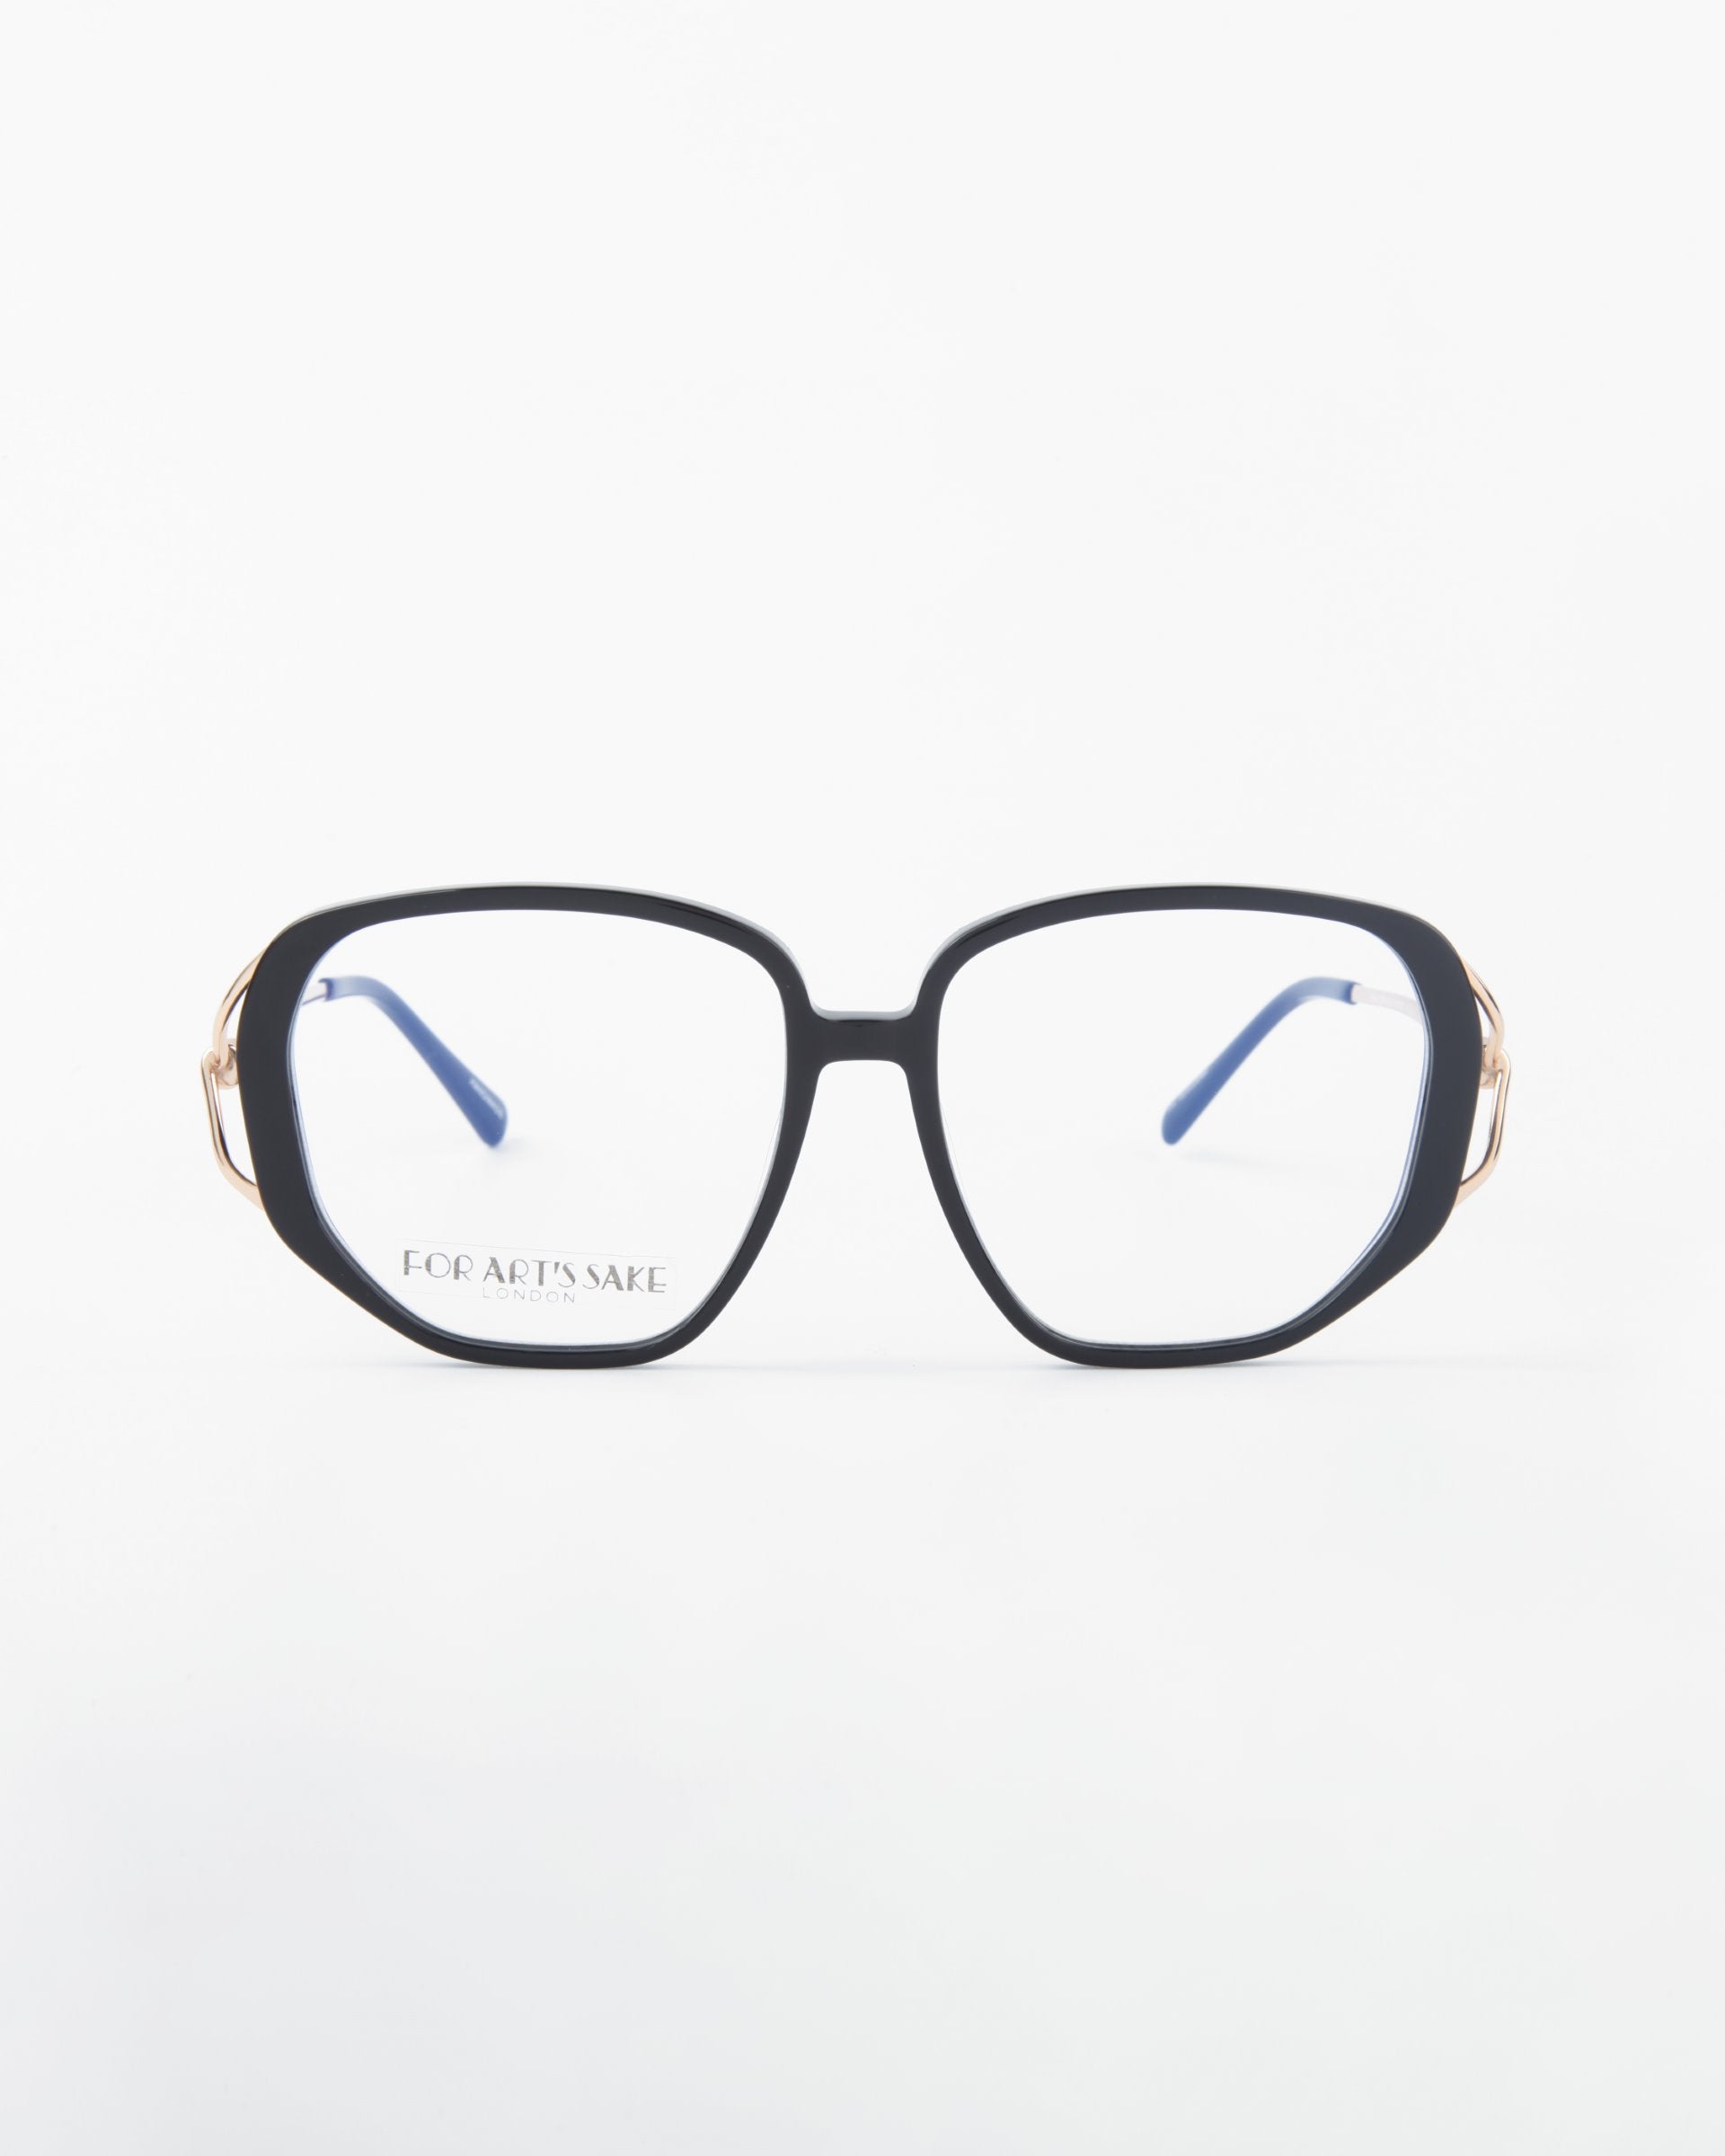 A pair of square-rimmed eyeglasses with black frames and blue temples, incorporating a blue light filter. The brand "For Art's Sake® Remix" is visible on the left lens against a plain white background.